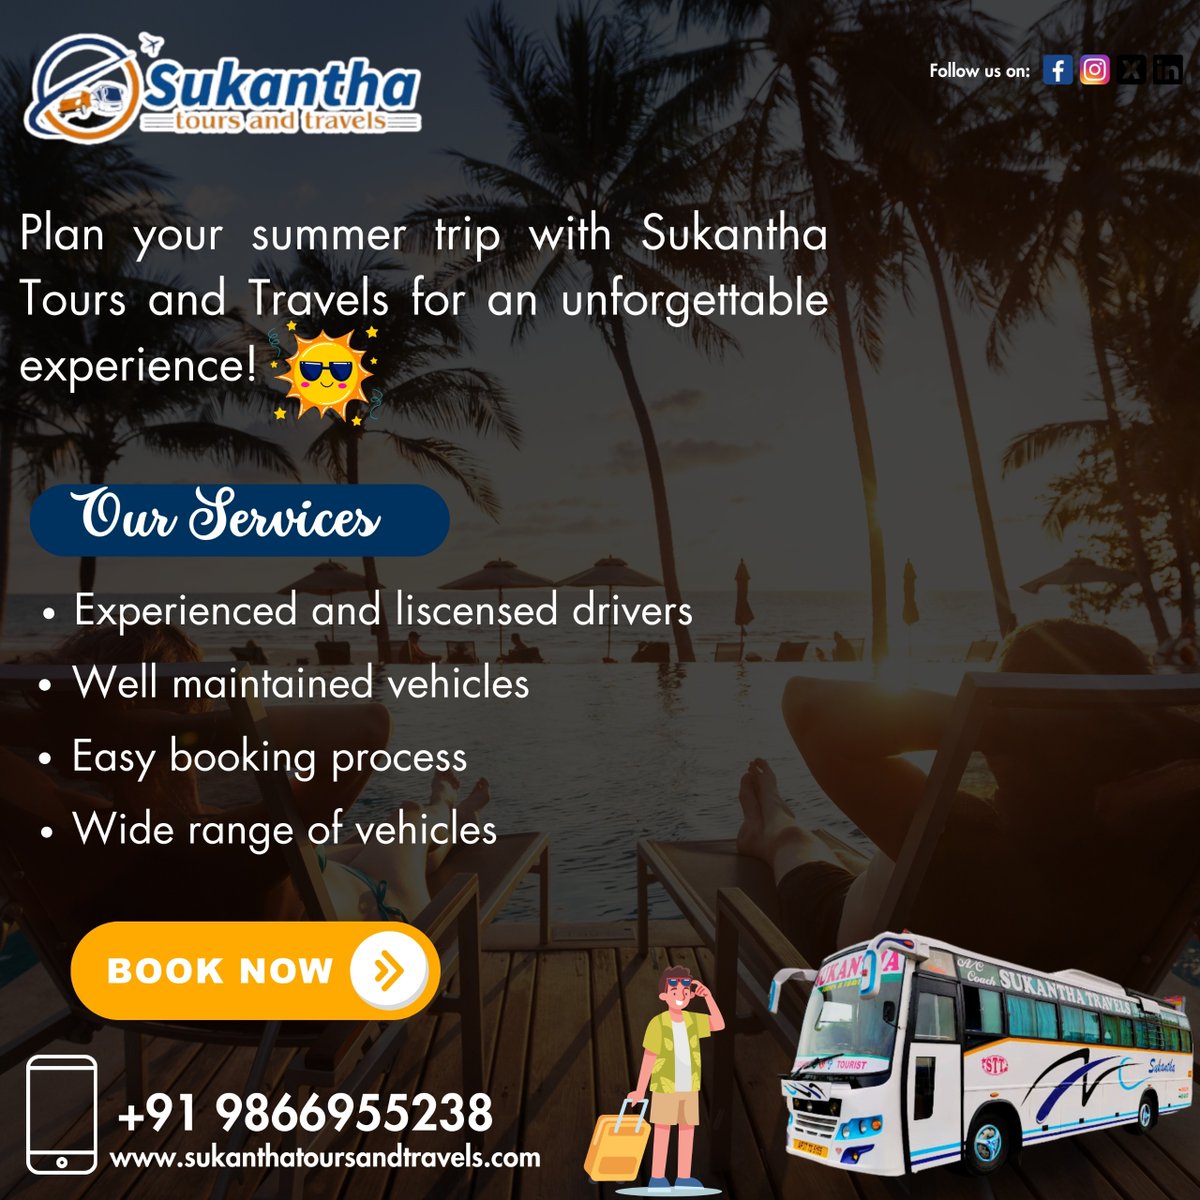 🌞 Plan your summer trip with Sukantha Tours and Travels for an unforgettable experience! 🚗

Our Services:
Experienced and licensed drivers
Well-maintained vehicles
Easy booking process
Wide range of vehicles

📞 Book Now: +91 9866955238

#SukanthaToursAndTravels #SummerTrip